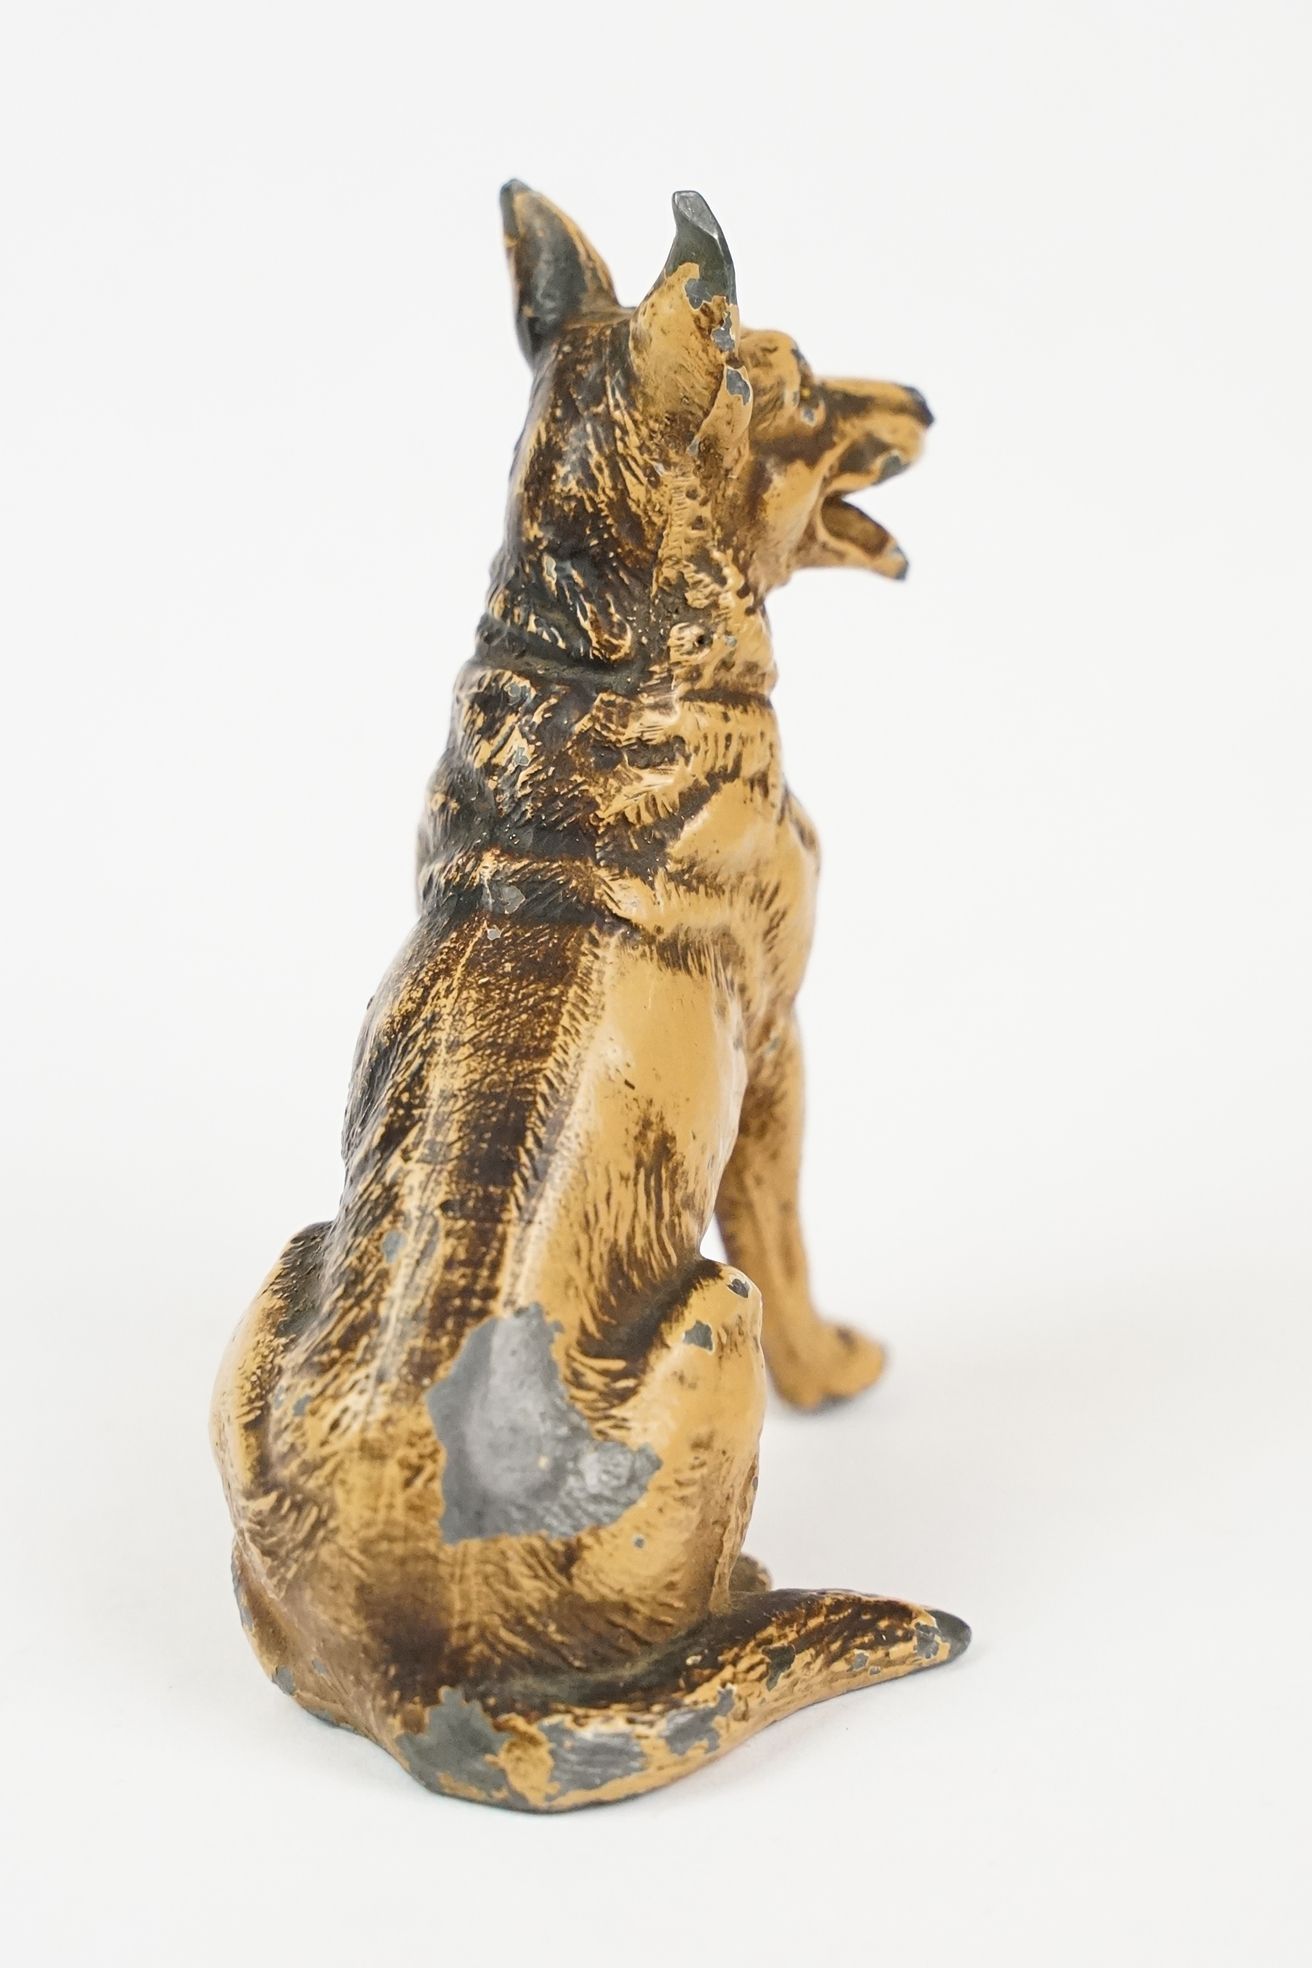 Austrian style Cold Painted Model of a Seated Alsatian / German Shepherd Dog, 3" tall - Image 4 of 6